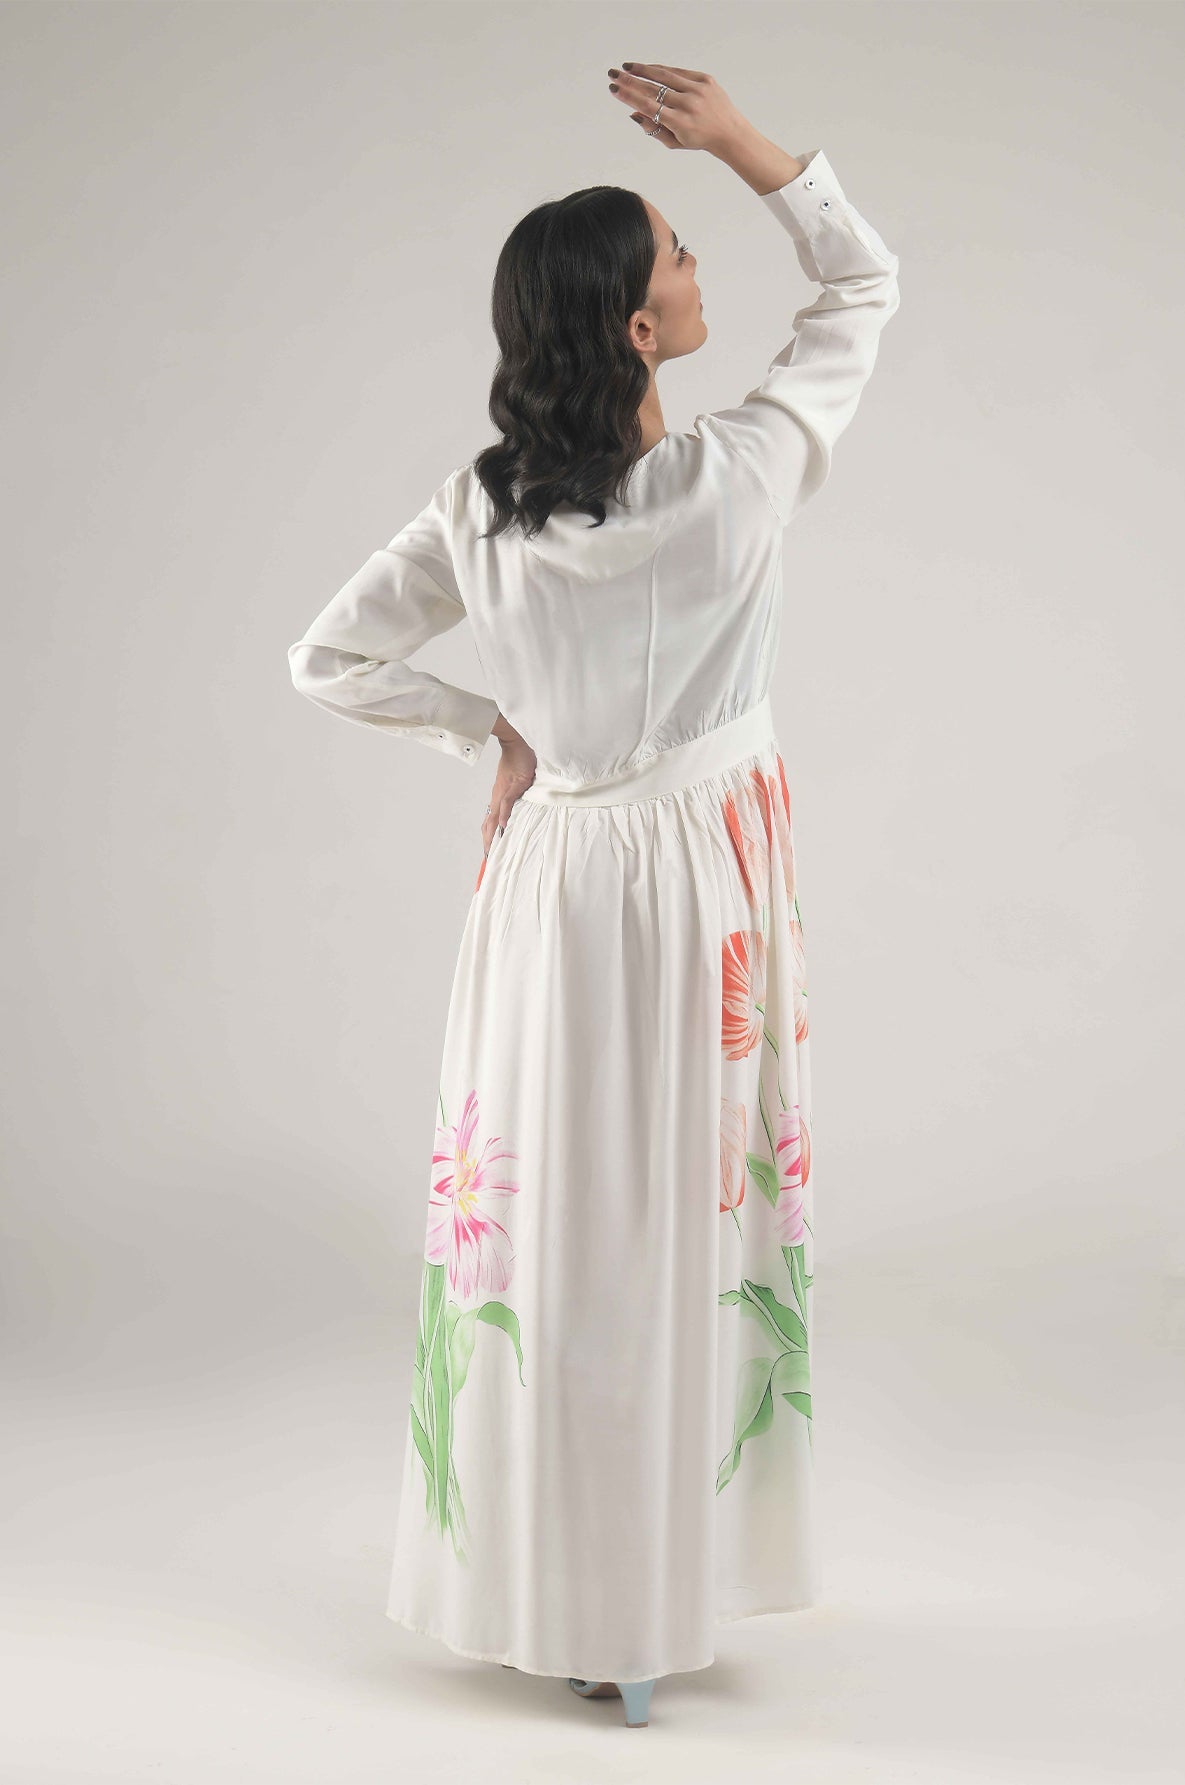 Buy Negative Apparel White Floral Print A-line Dress with Cuff Sleeves FD in Pakistan